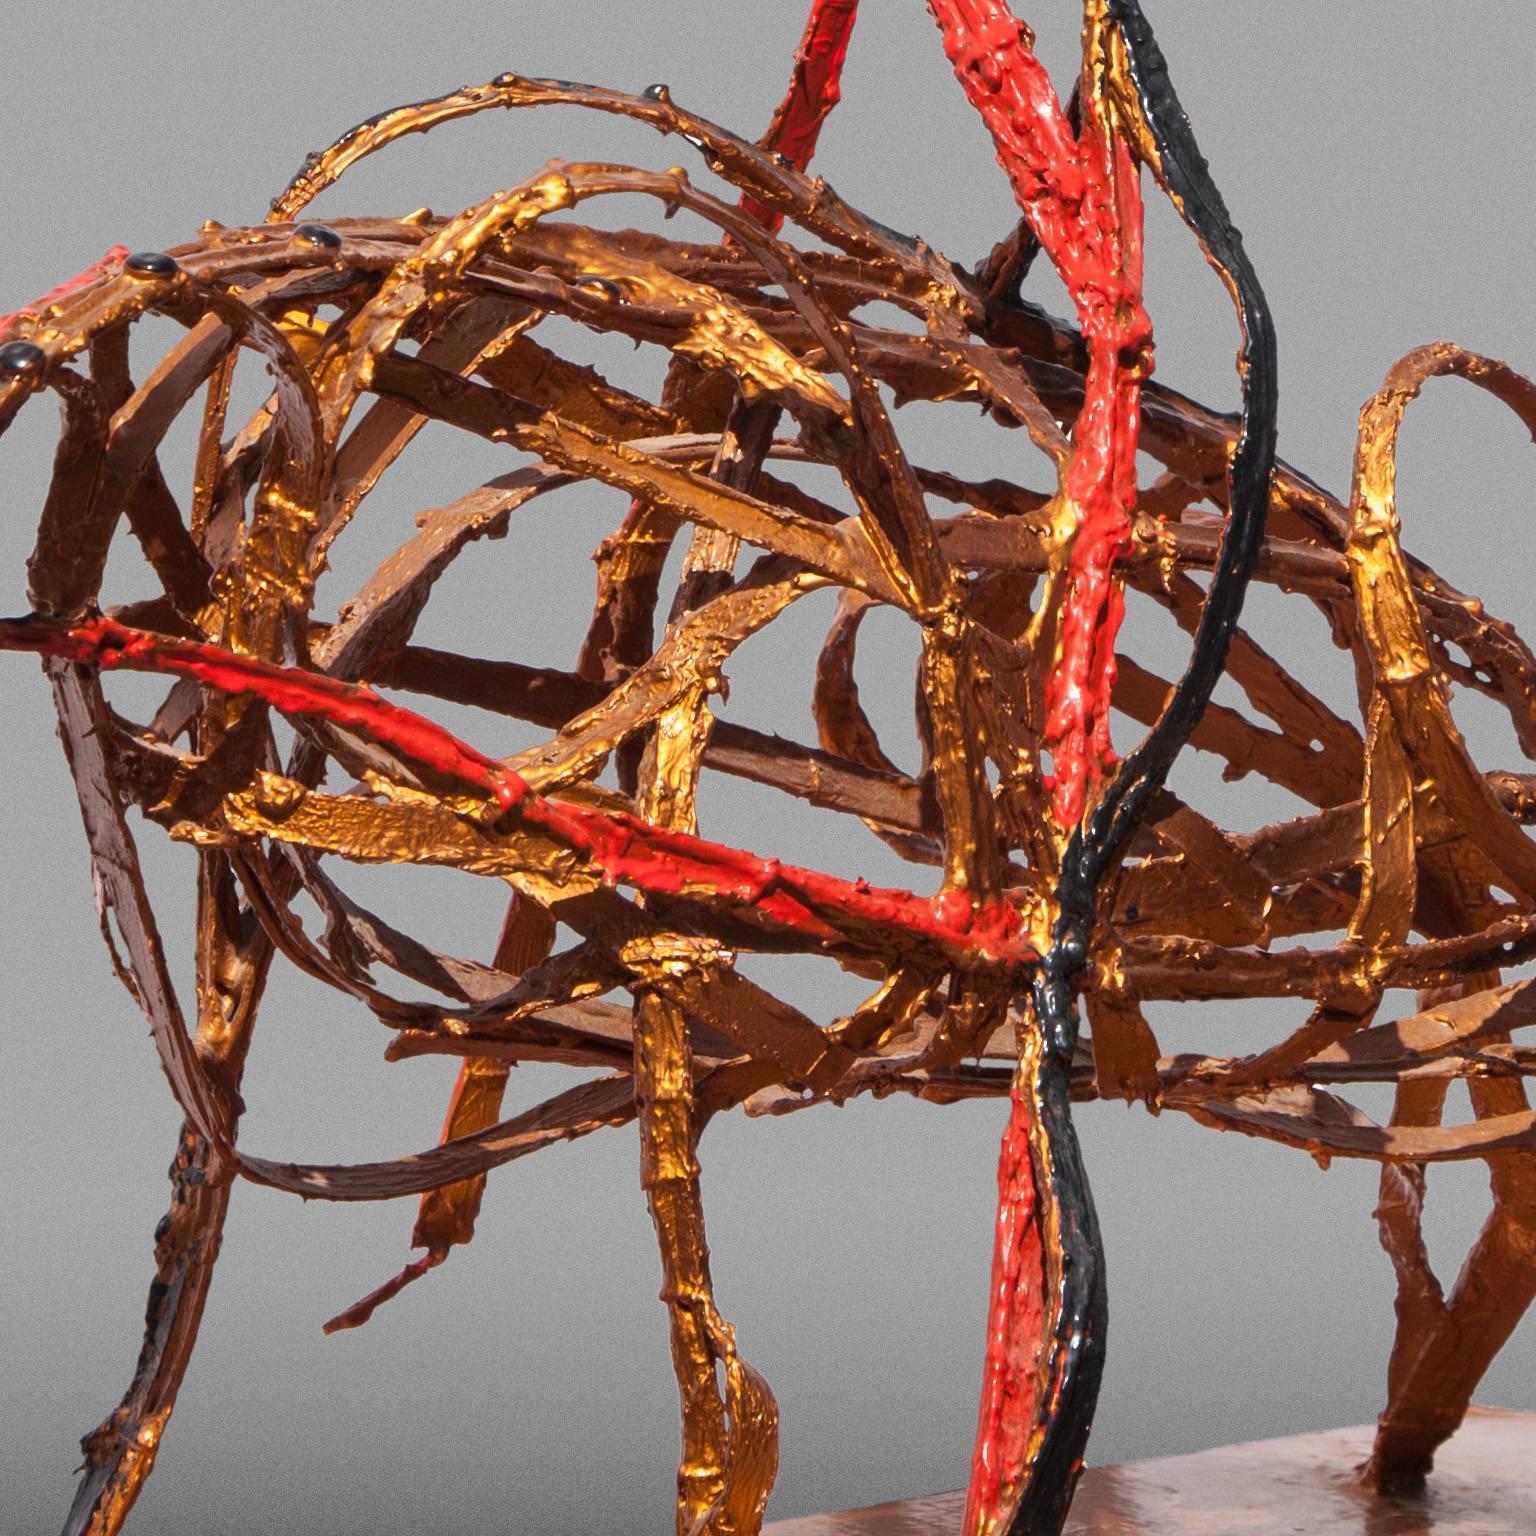 Angelo Canevari’s “Picador” is a 37.5 x 16 inch mix media sculpture. It is made of metal, resin, automotive paint, and cardboard. It represents the lancer and a bull of the famous Spanish bullfighting also known as Corrida. However Canevari stays